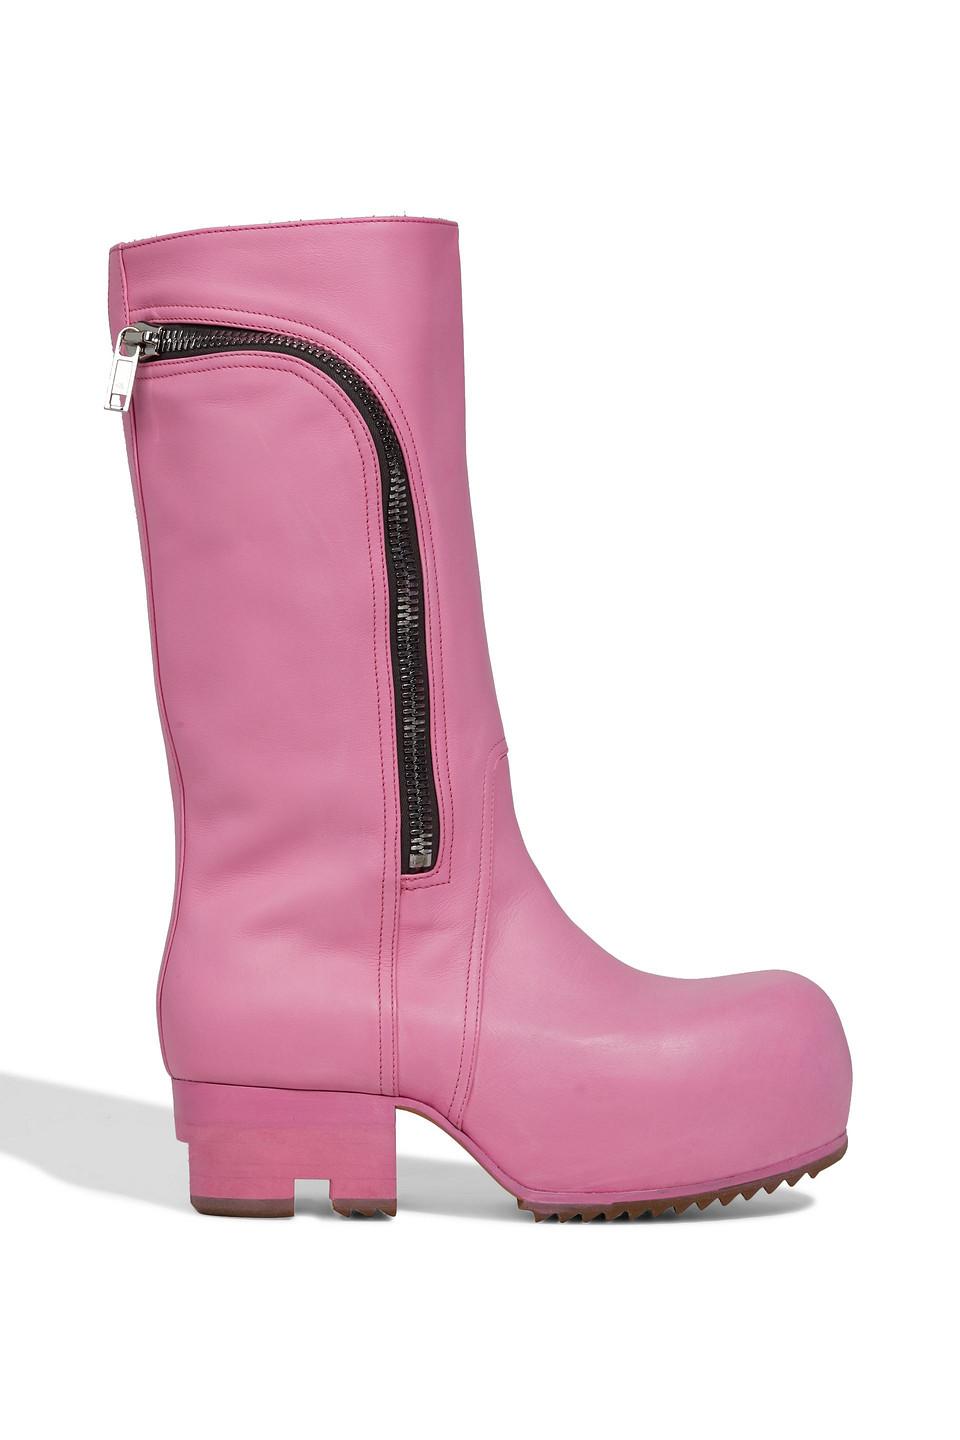 Rick Owens Bauhaus Ballast Leather Boots in Pink | Lyst